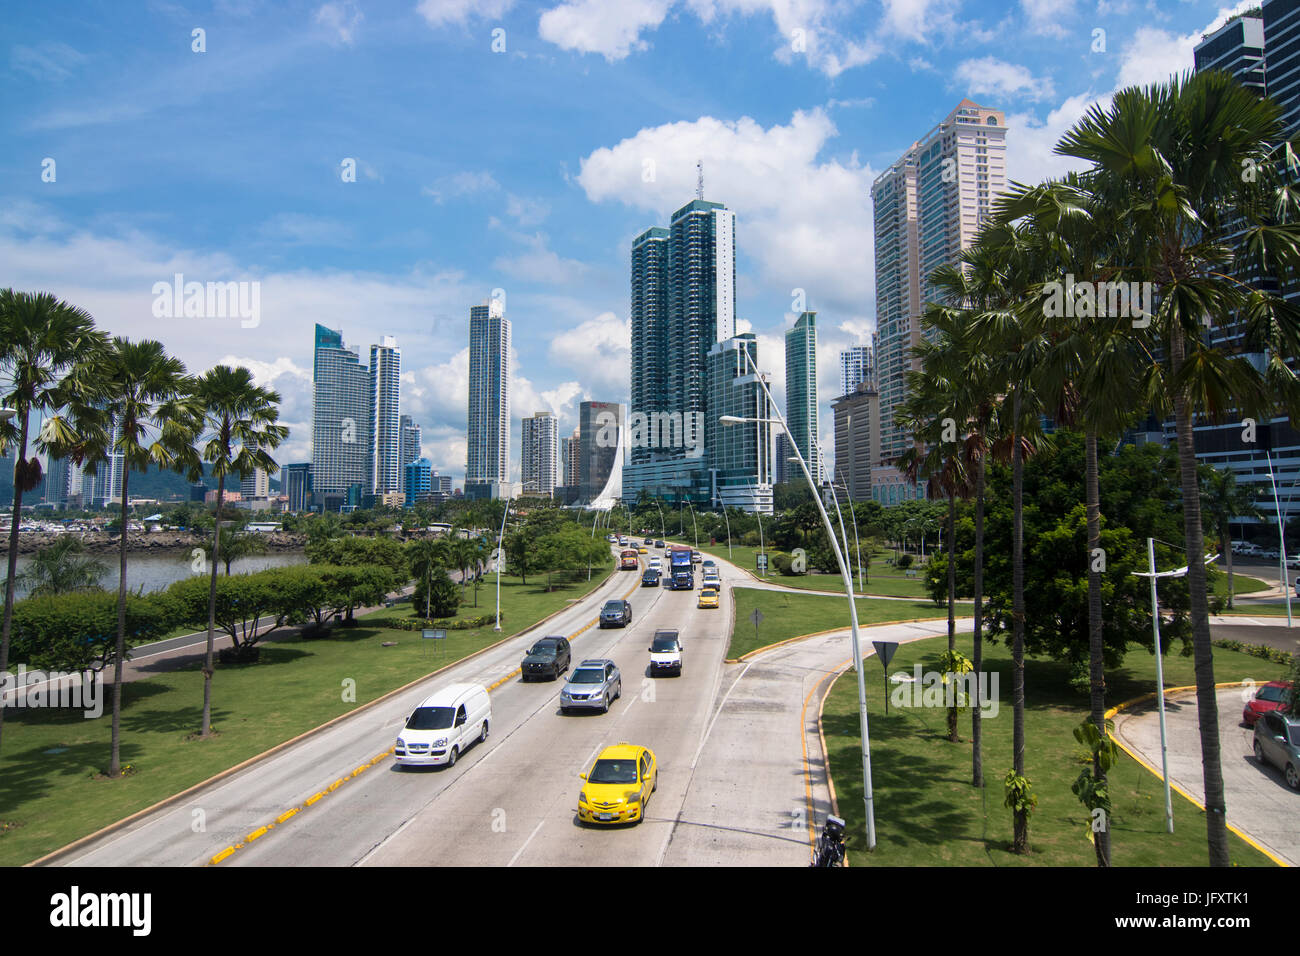 Cinta Costera with cars and high rise buildings, Panama City, Panama Stock Photo